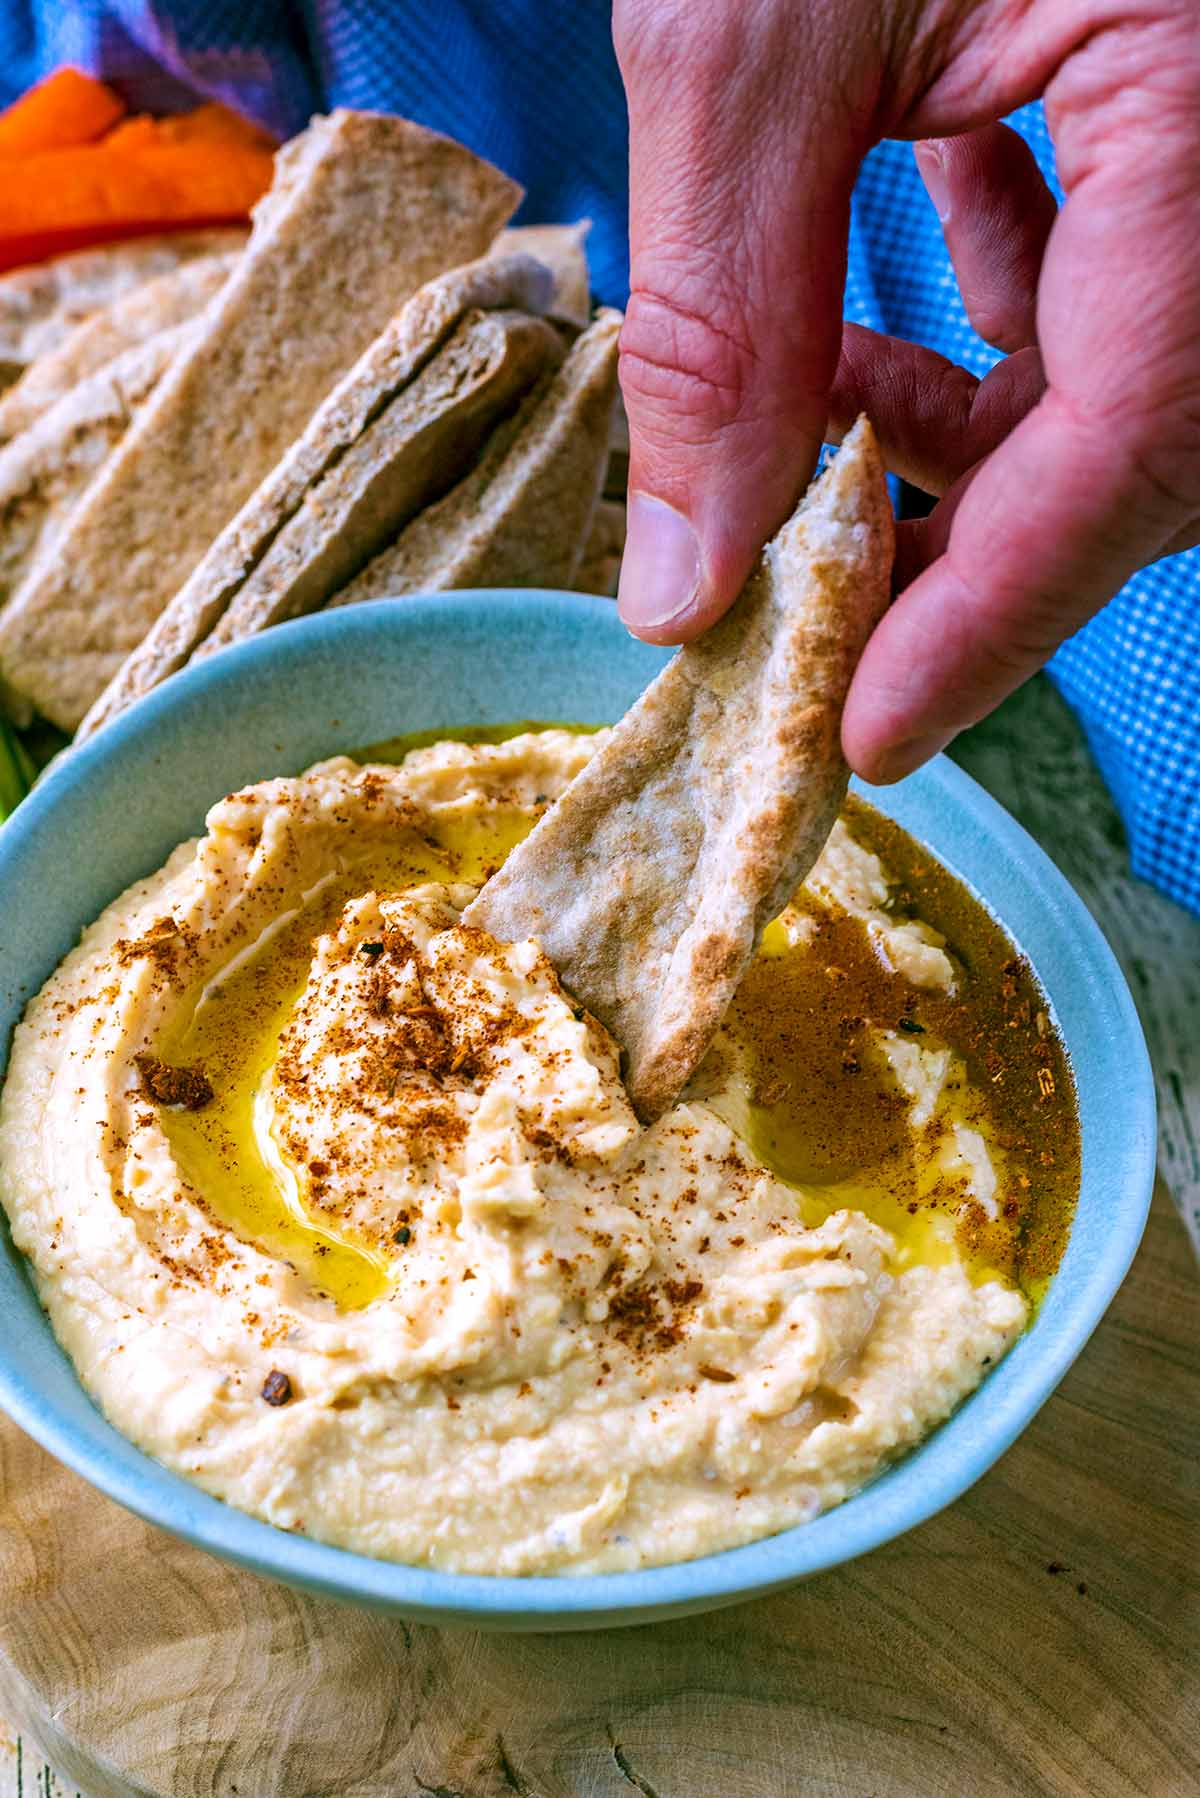 A hand dipping a piece of pita bread into some hummus.